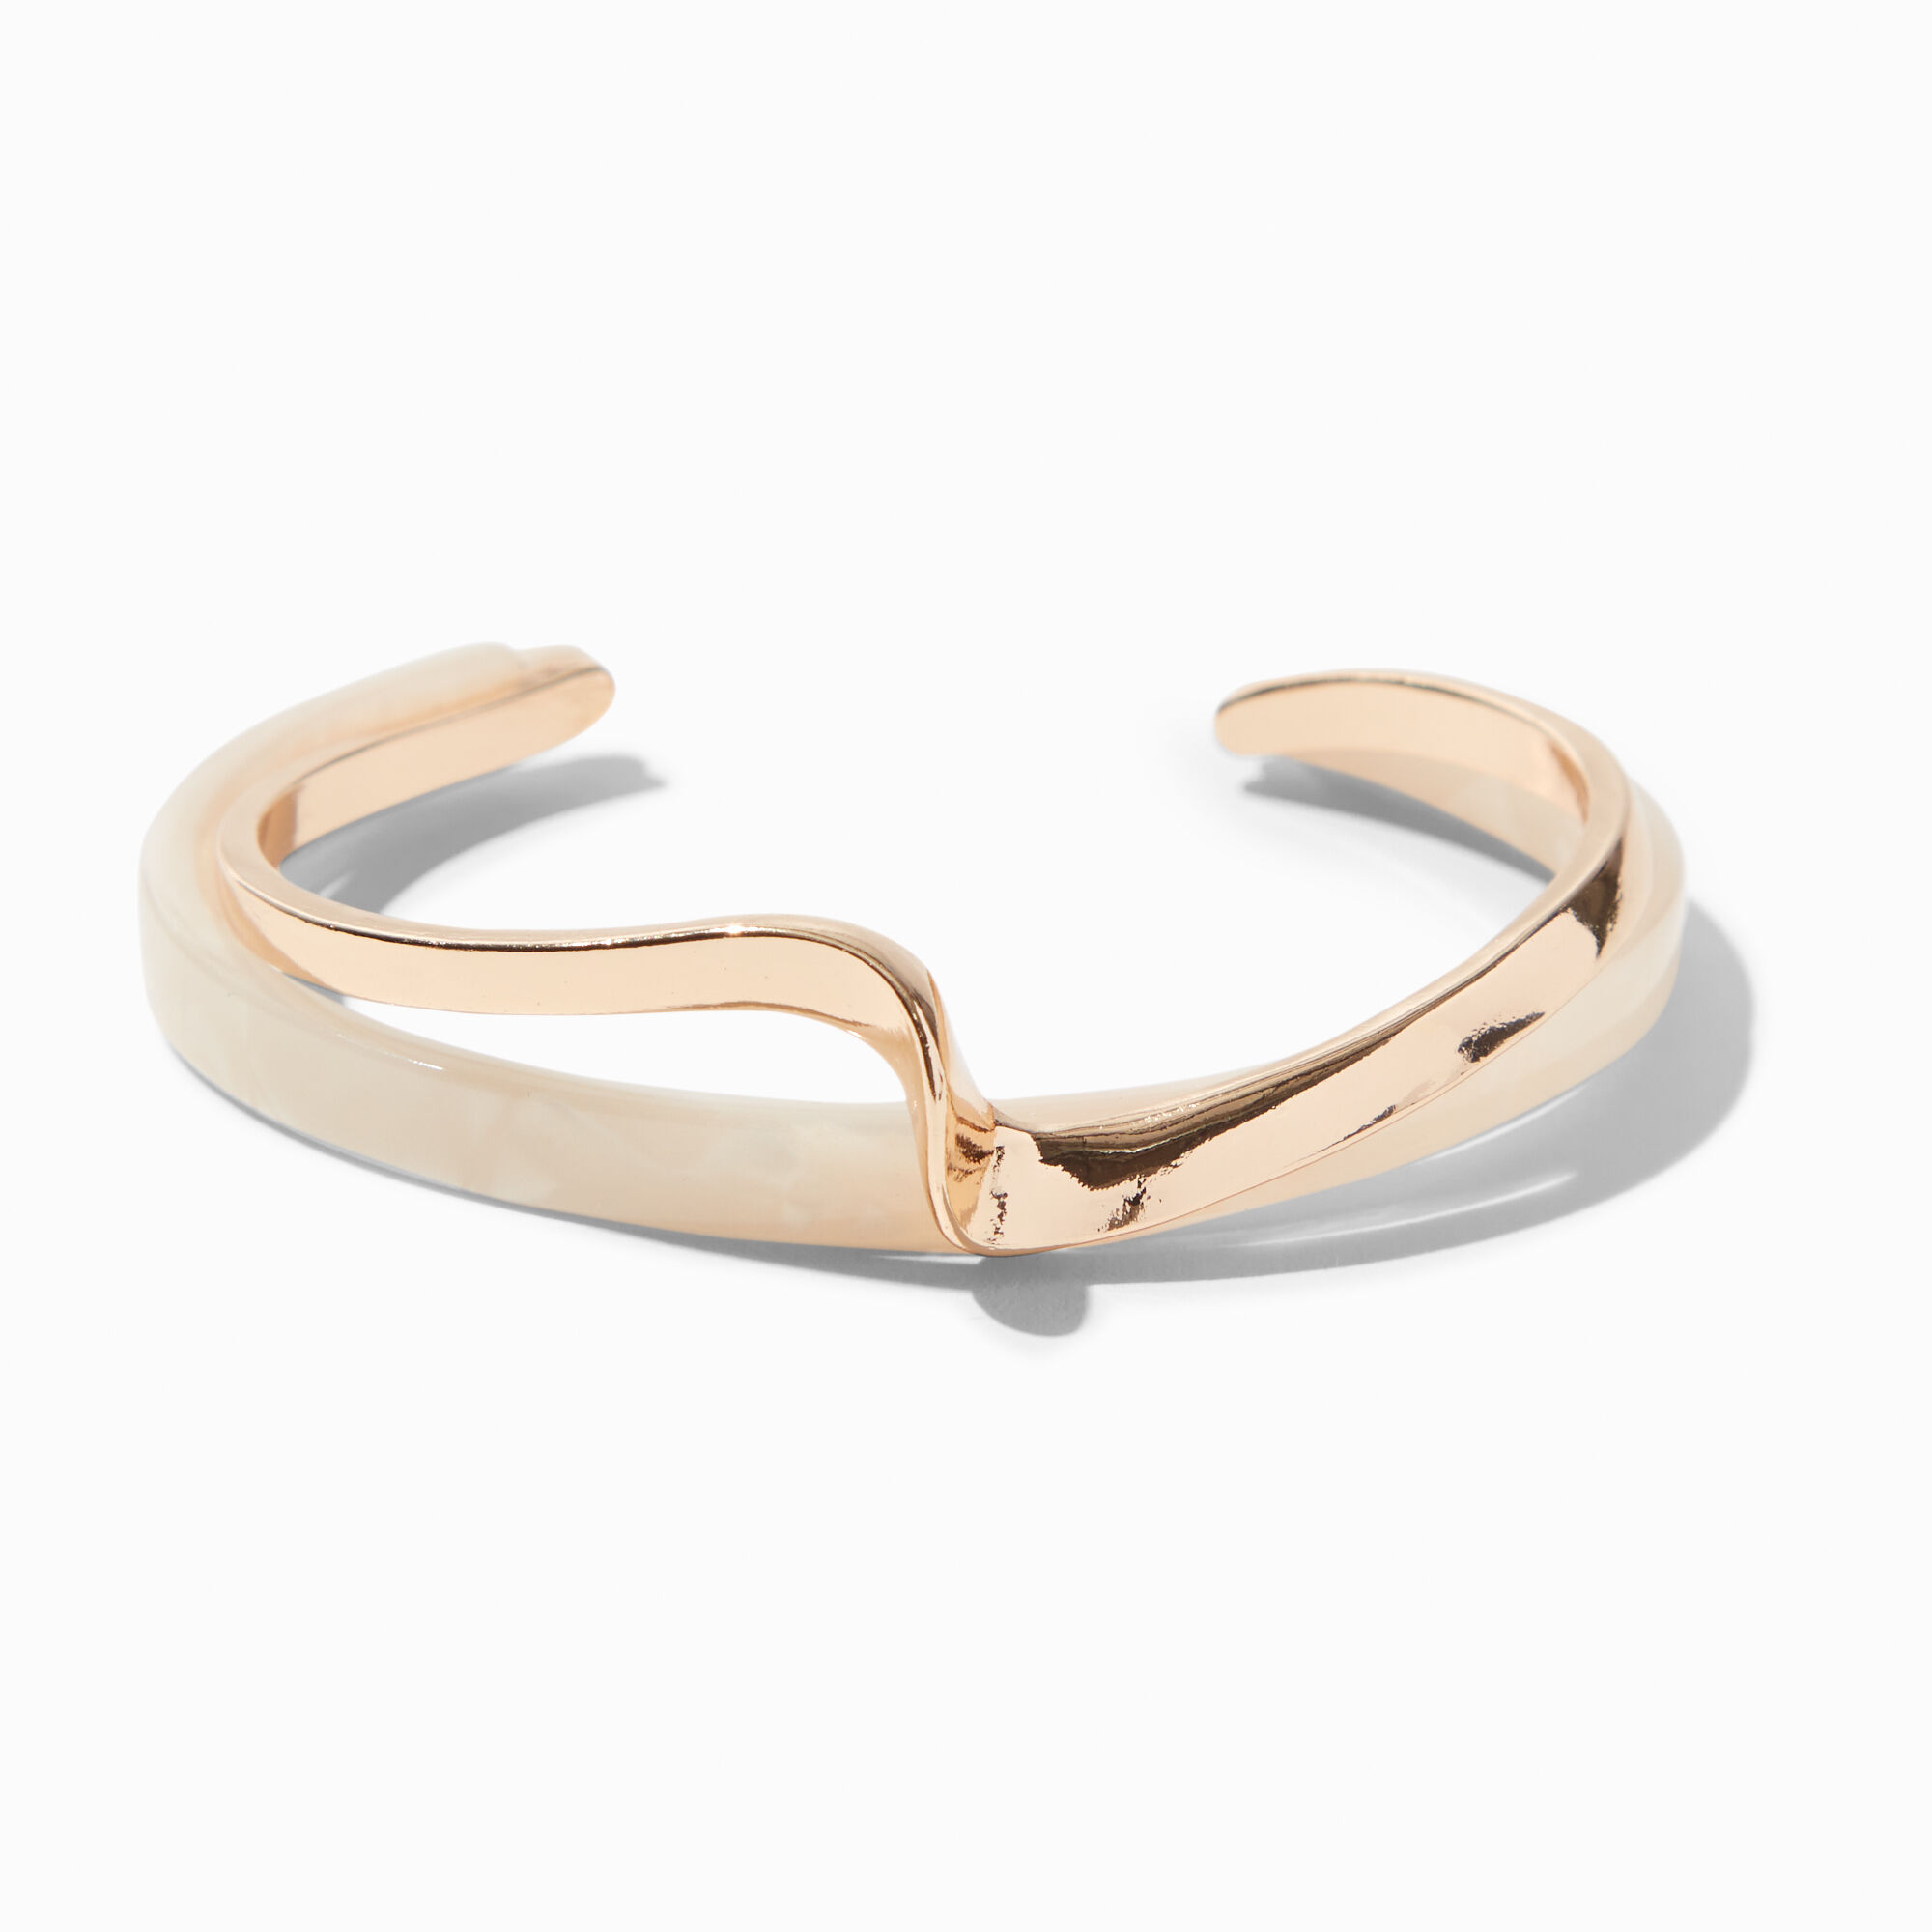 View Claires GoldTone Squiggle Resin Cuff Bracelet White information